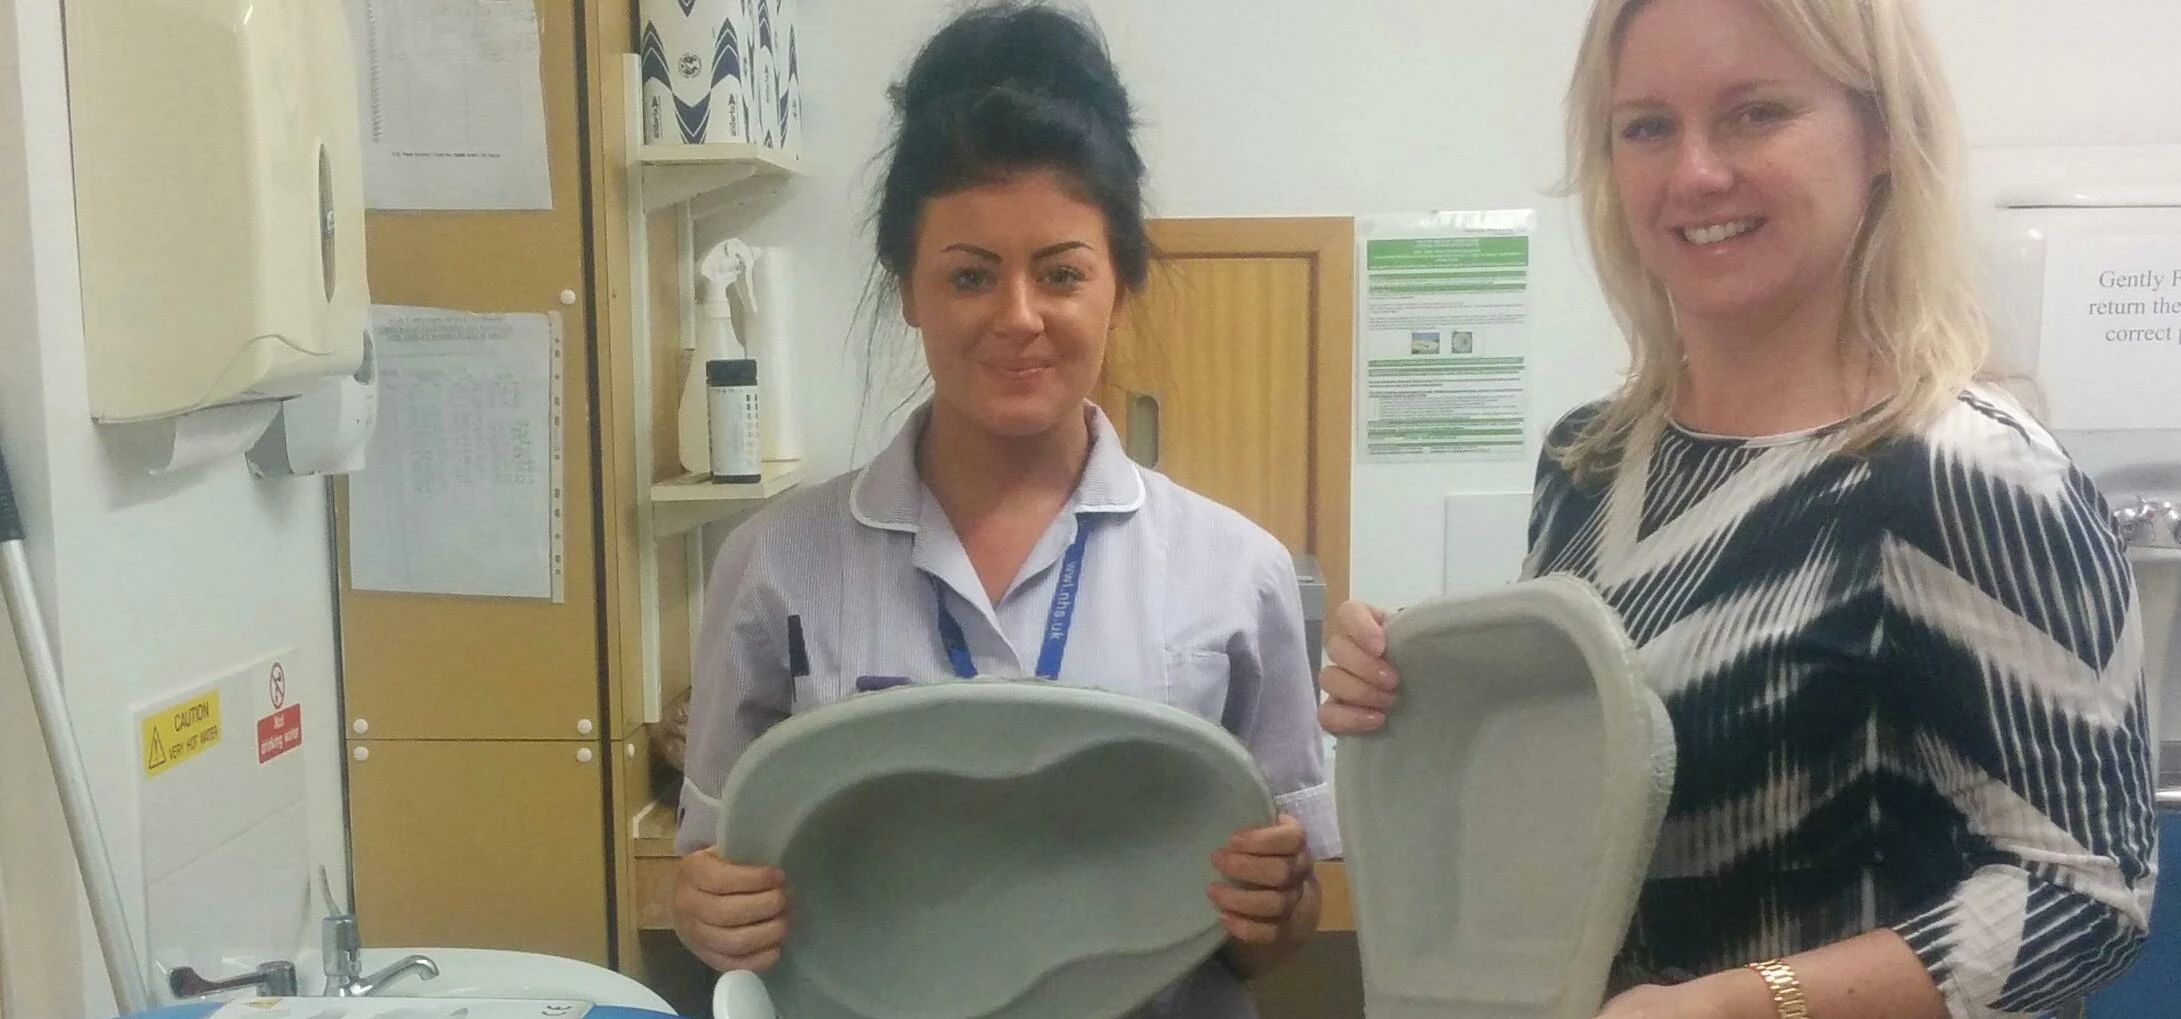 Natalie Reaney, Vernacare Key Account Manager and the housekeeper at Wrightington Hospital, Wigan an